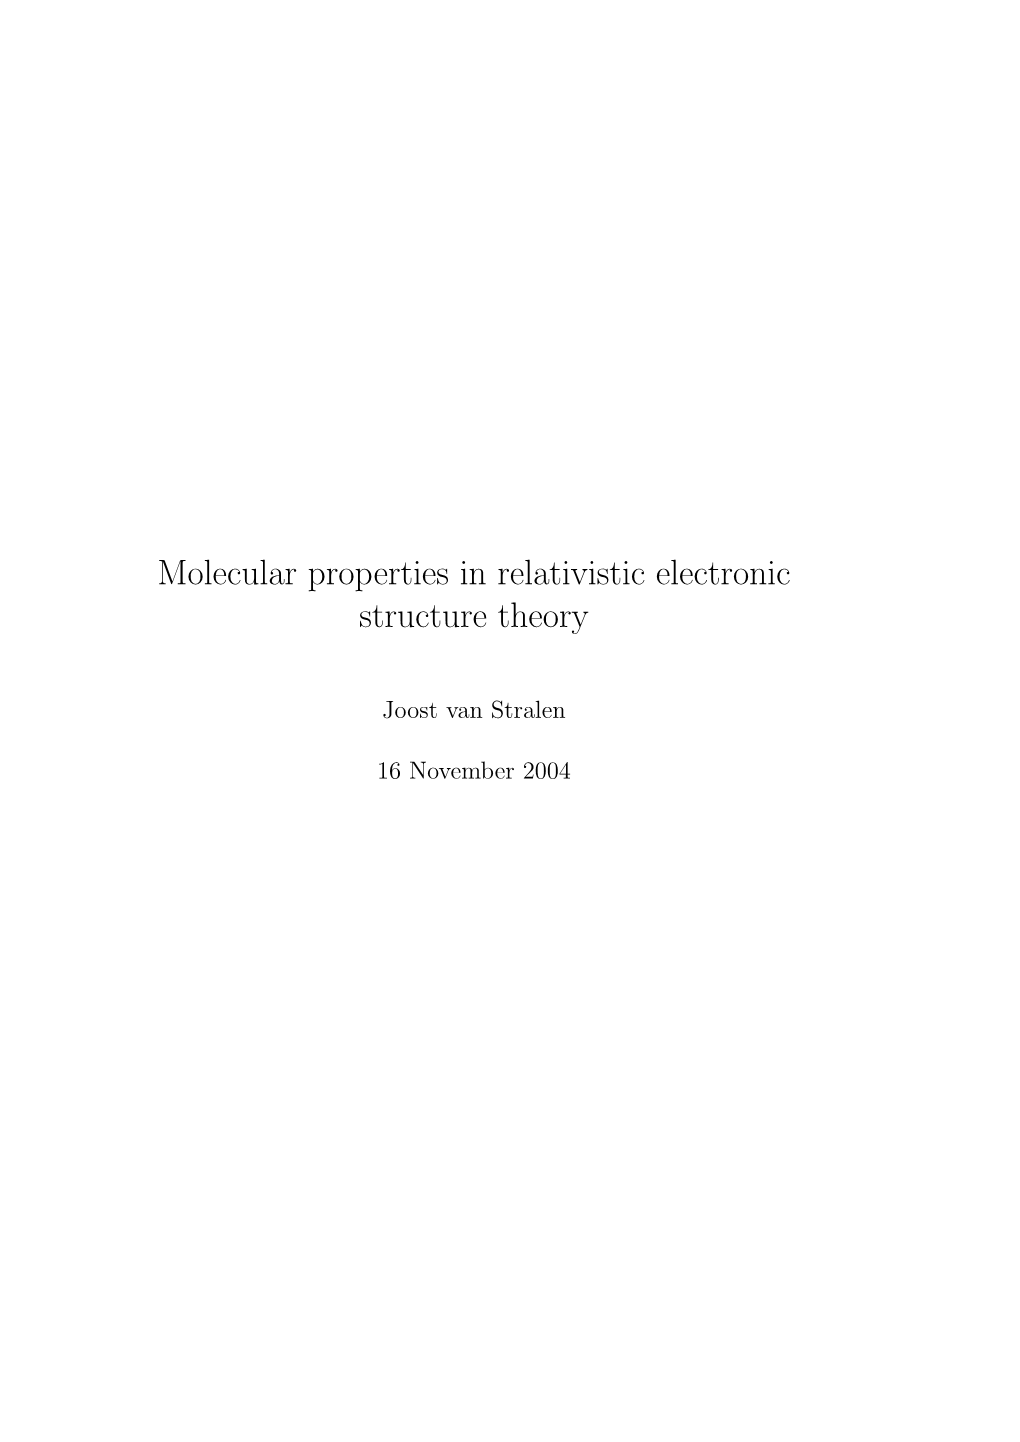 Molecular Properties in Relativistic Electronic Structure Theory